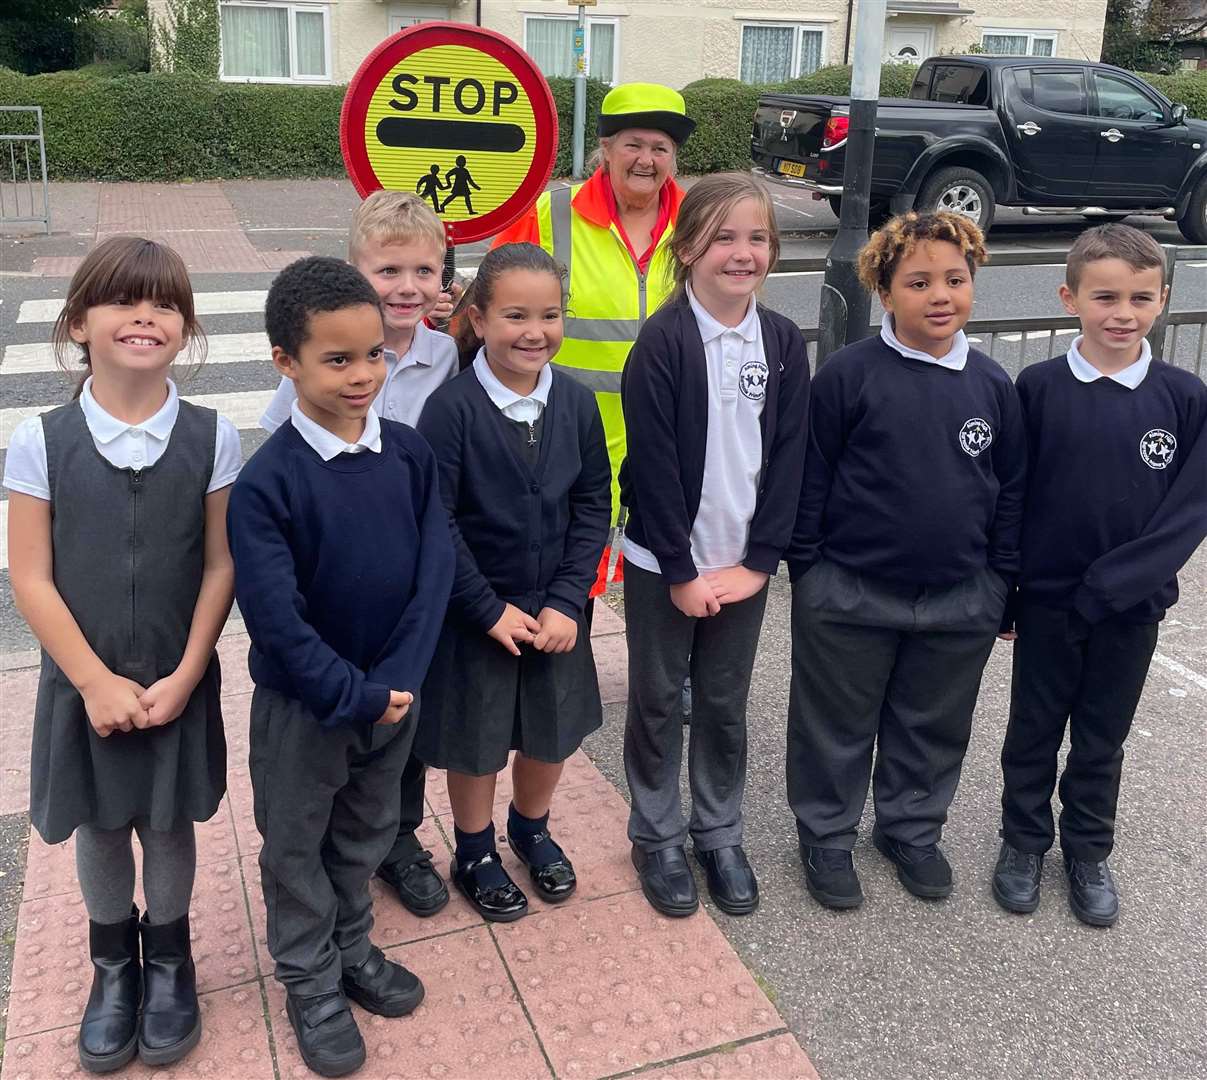 Medway lollipop lady Jenny Lewing has retired after 40 years with 37 at Barnsole Primary School in Gillingham. Picture: Medway Council